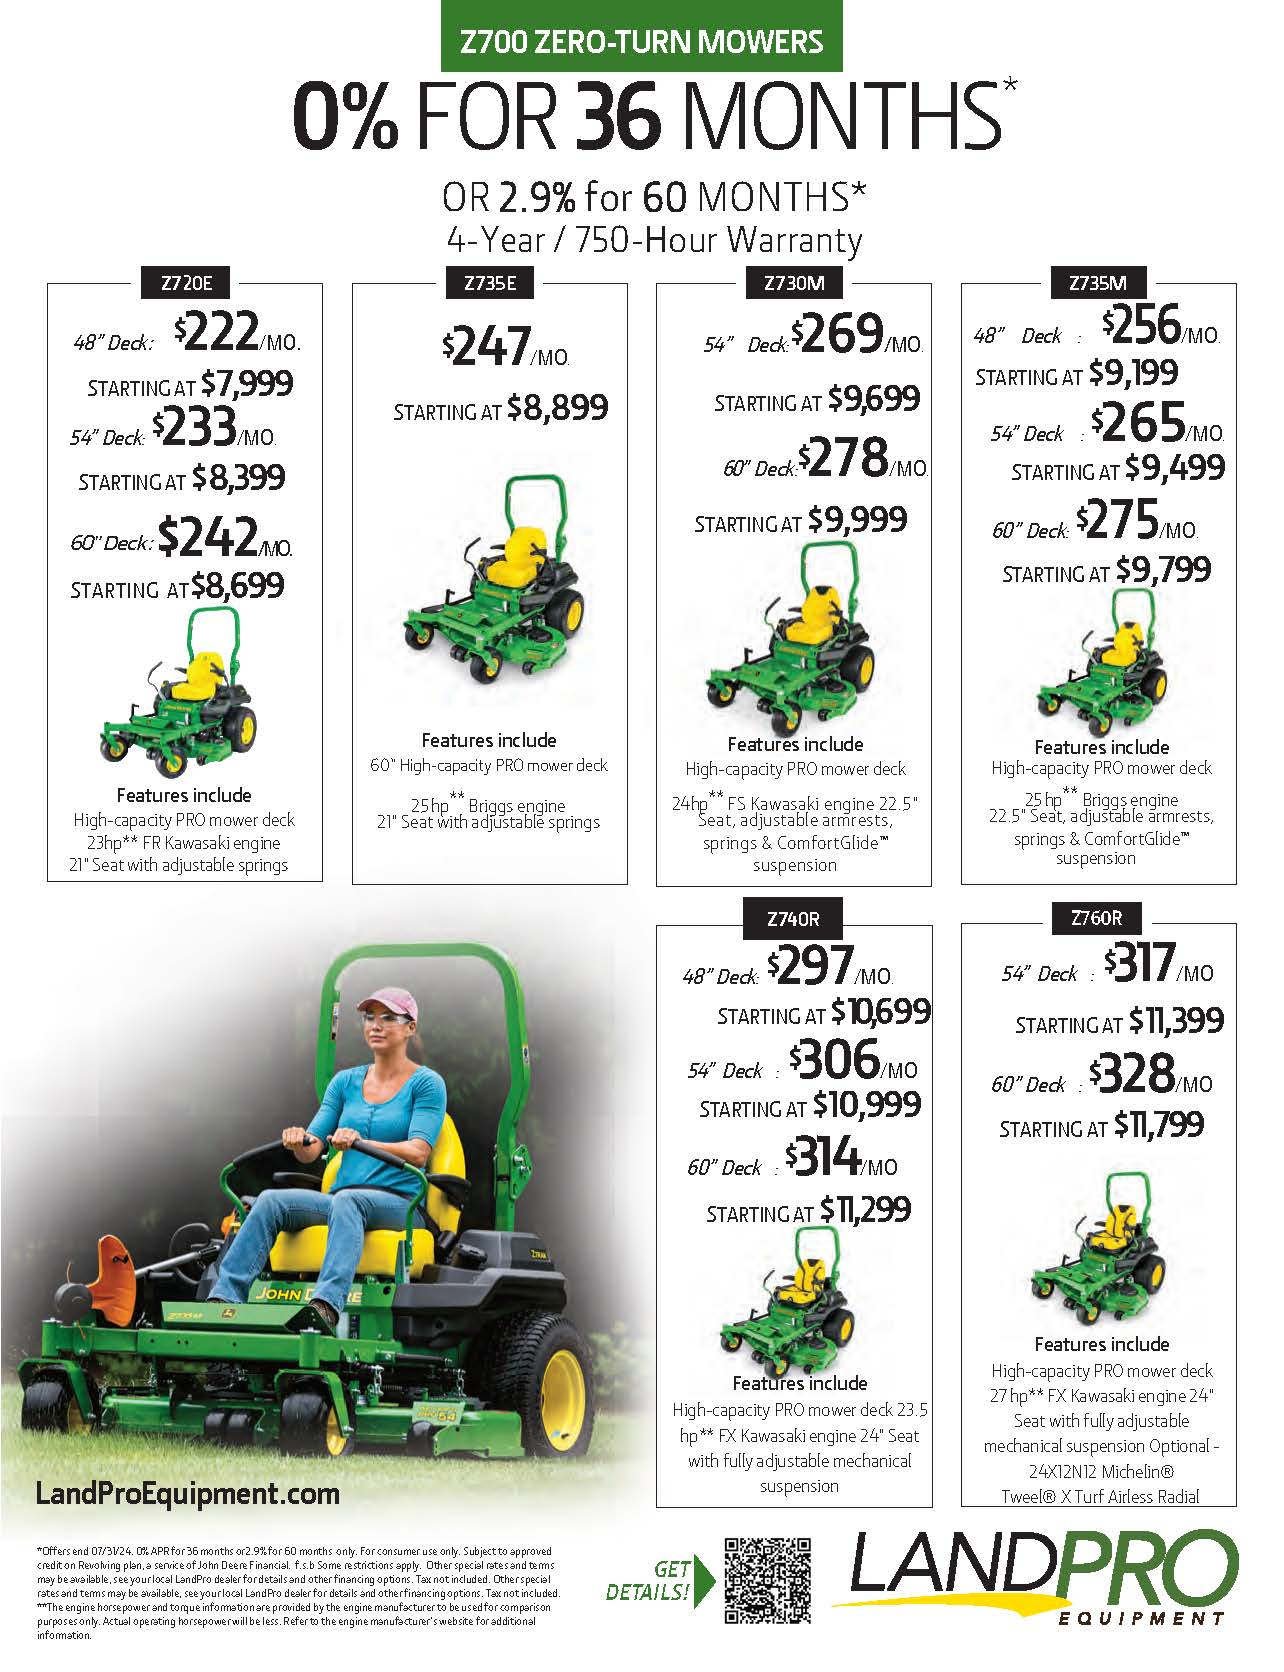 Mowers On Sale » LandPro Equipment; NY, OH & PA